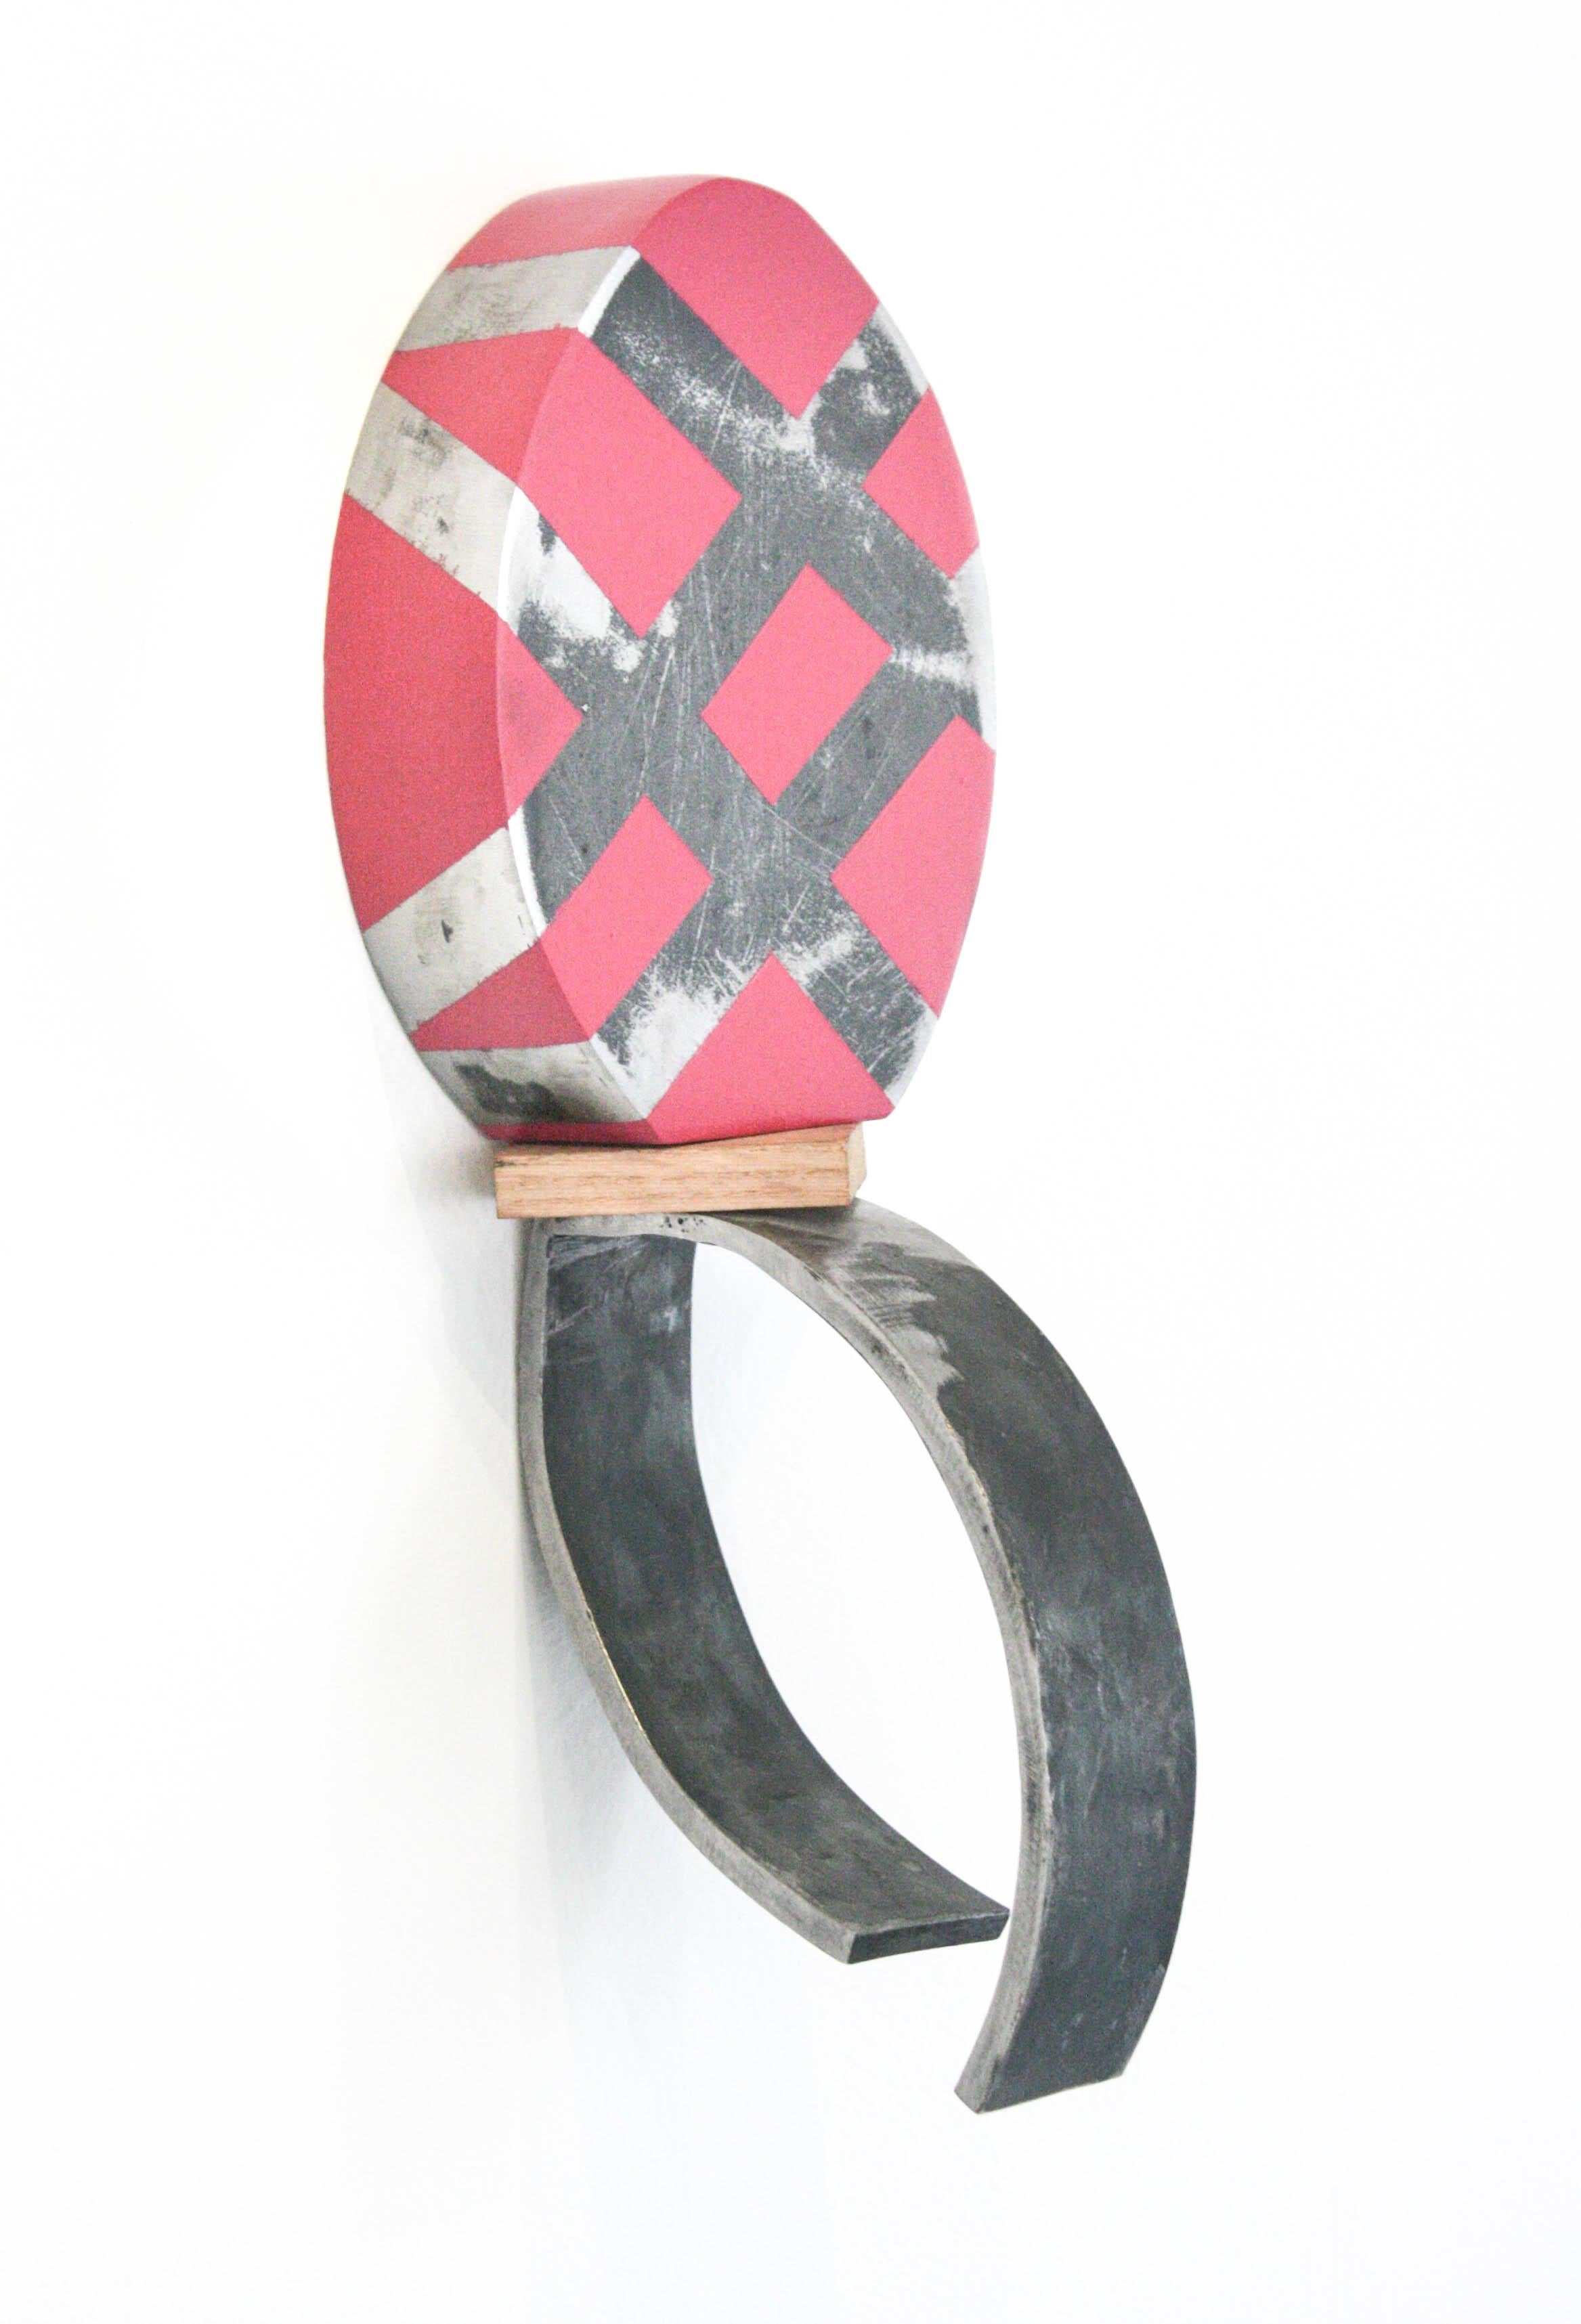 Outreach- Spray Paint, Steel, Wood, Pink, Black, Oval, Wall Mounted, Sculpture - Brown Abstract Sculpture by Desmond Lewis